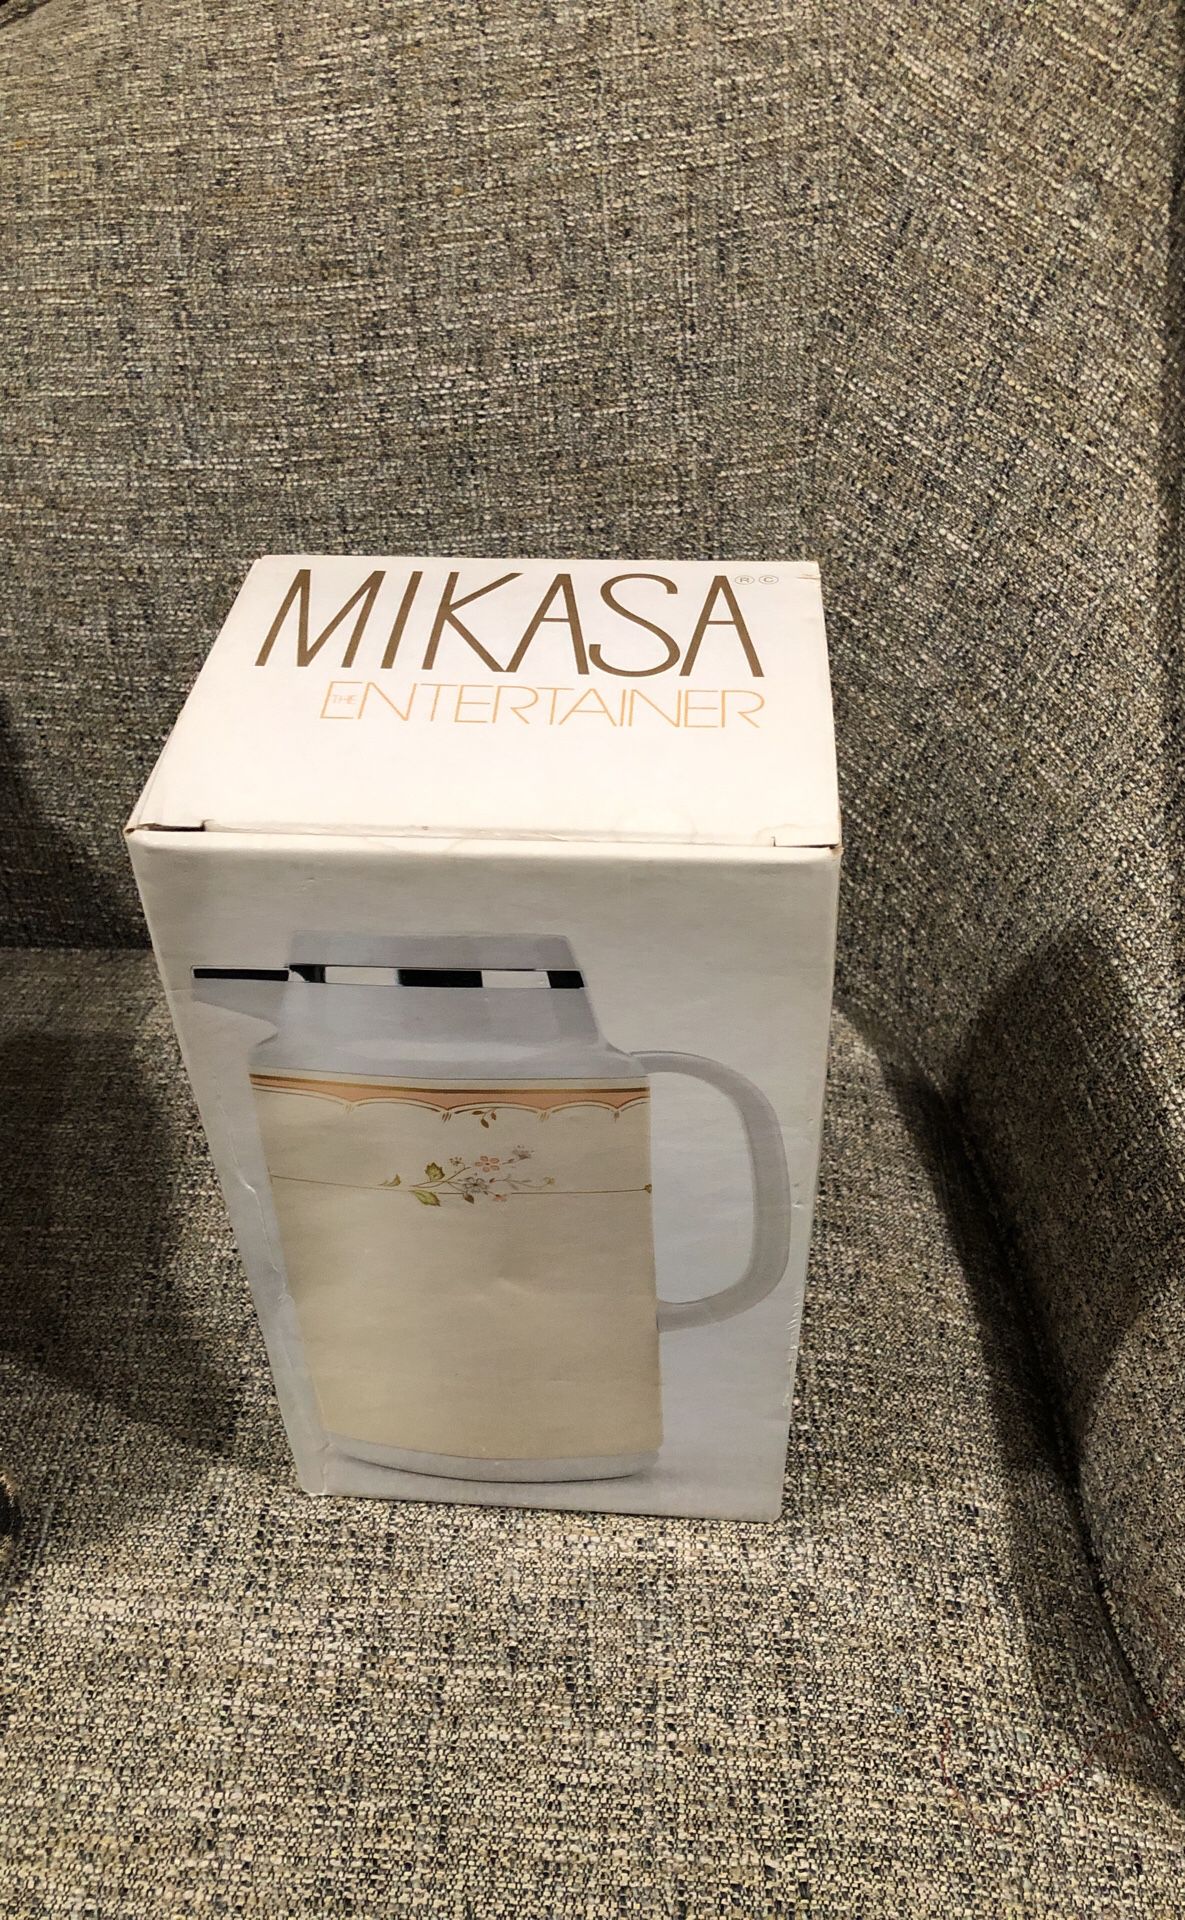 The Entrainer Mikasa Coffee Or Tea Thermal Carafe. Please see all the pictures and read the description